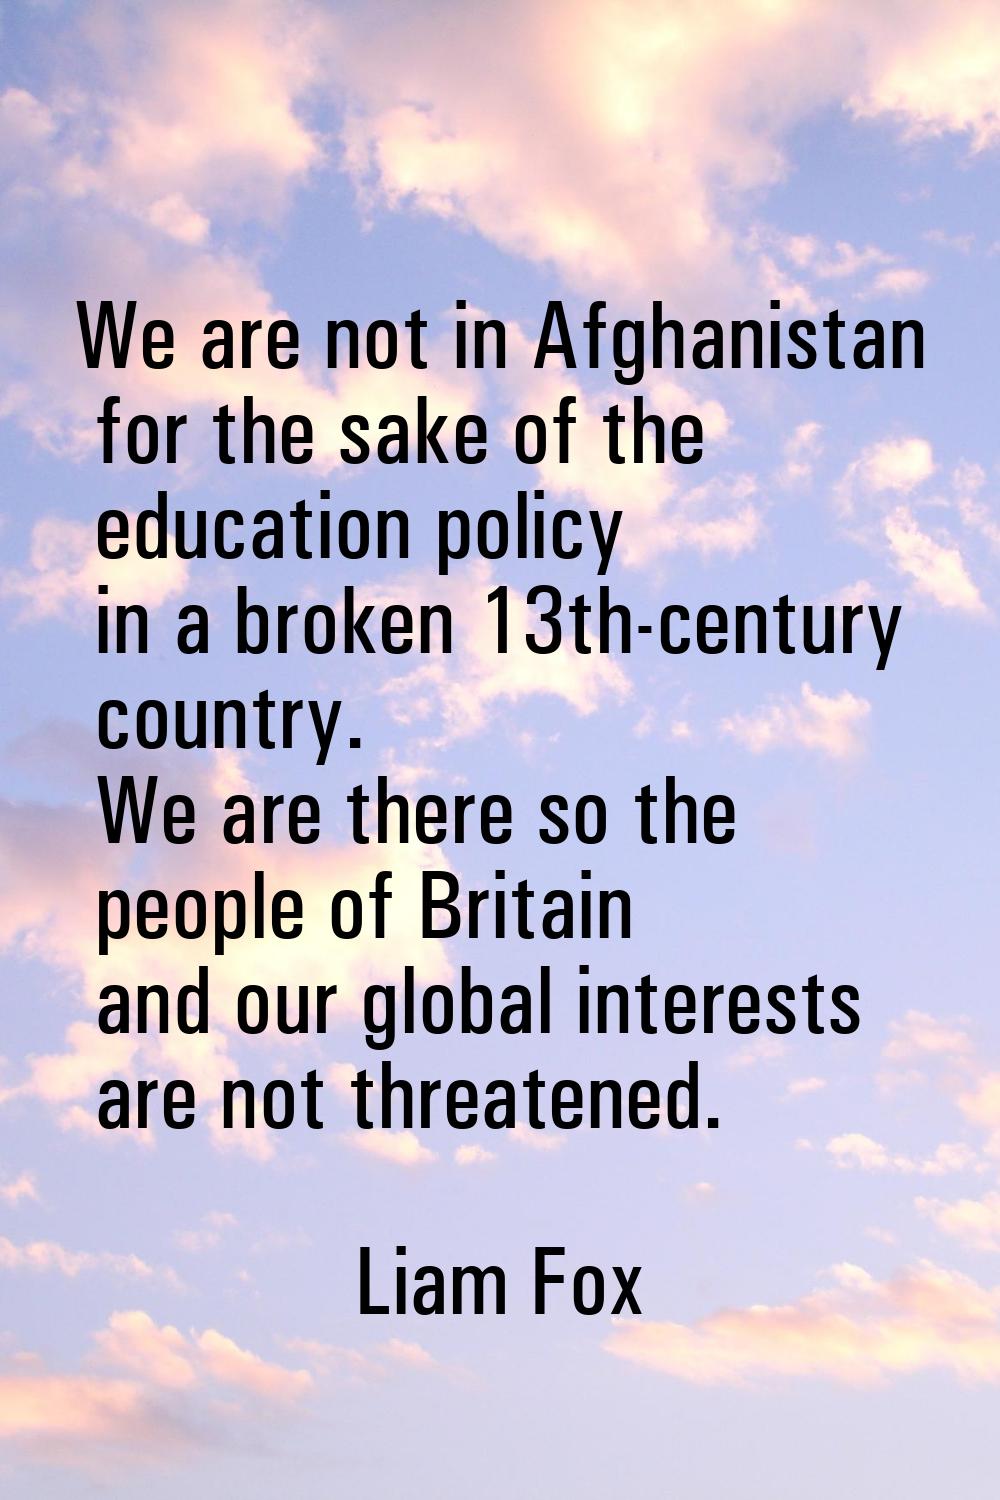 We are not in Afghanistan for the sake of the education policy in a broken 13th-century country. We